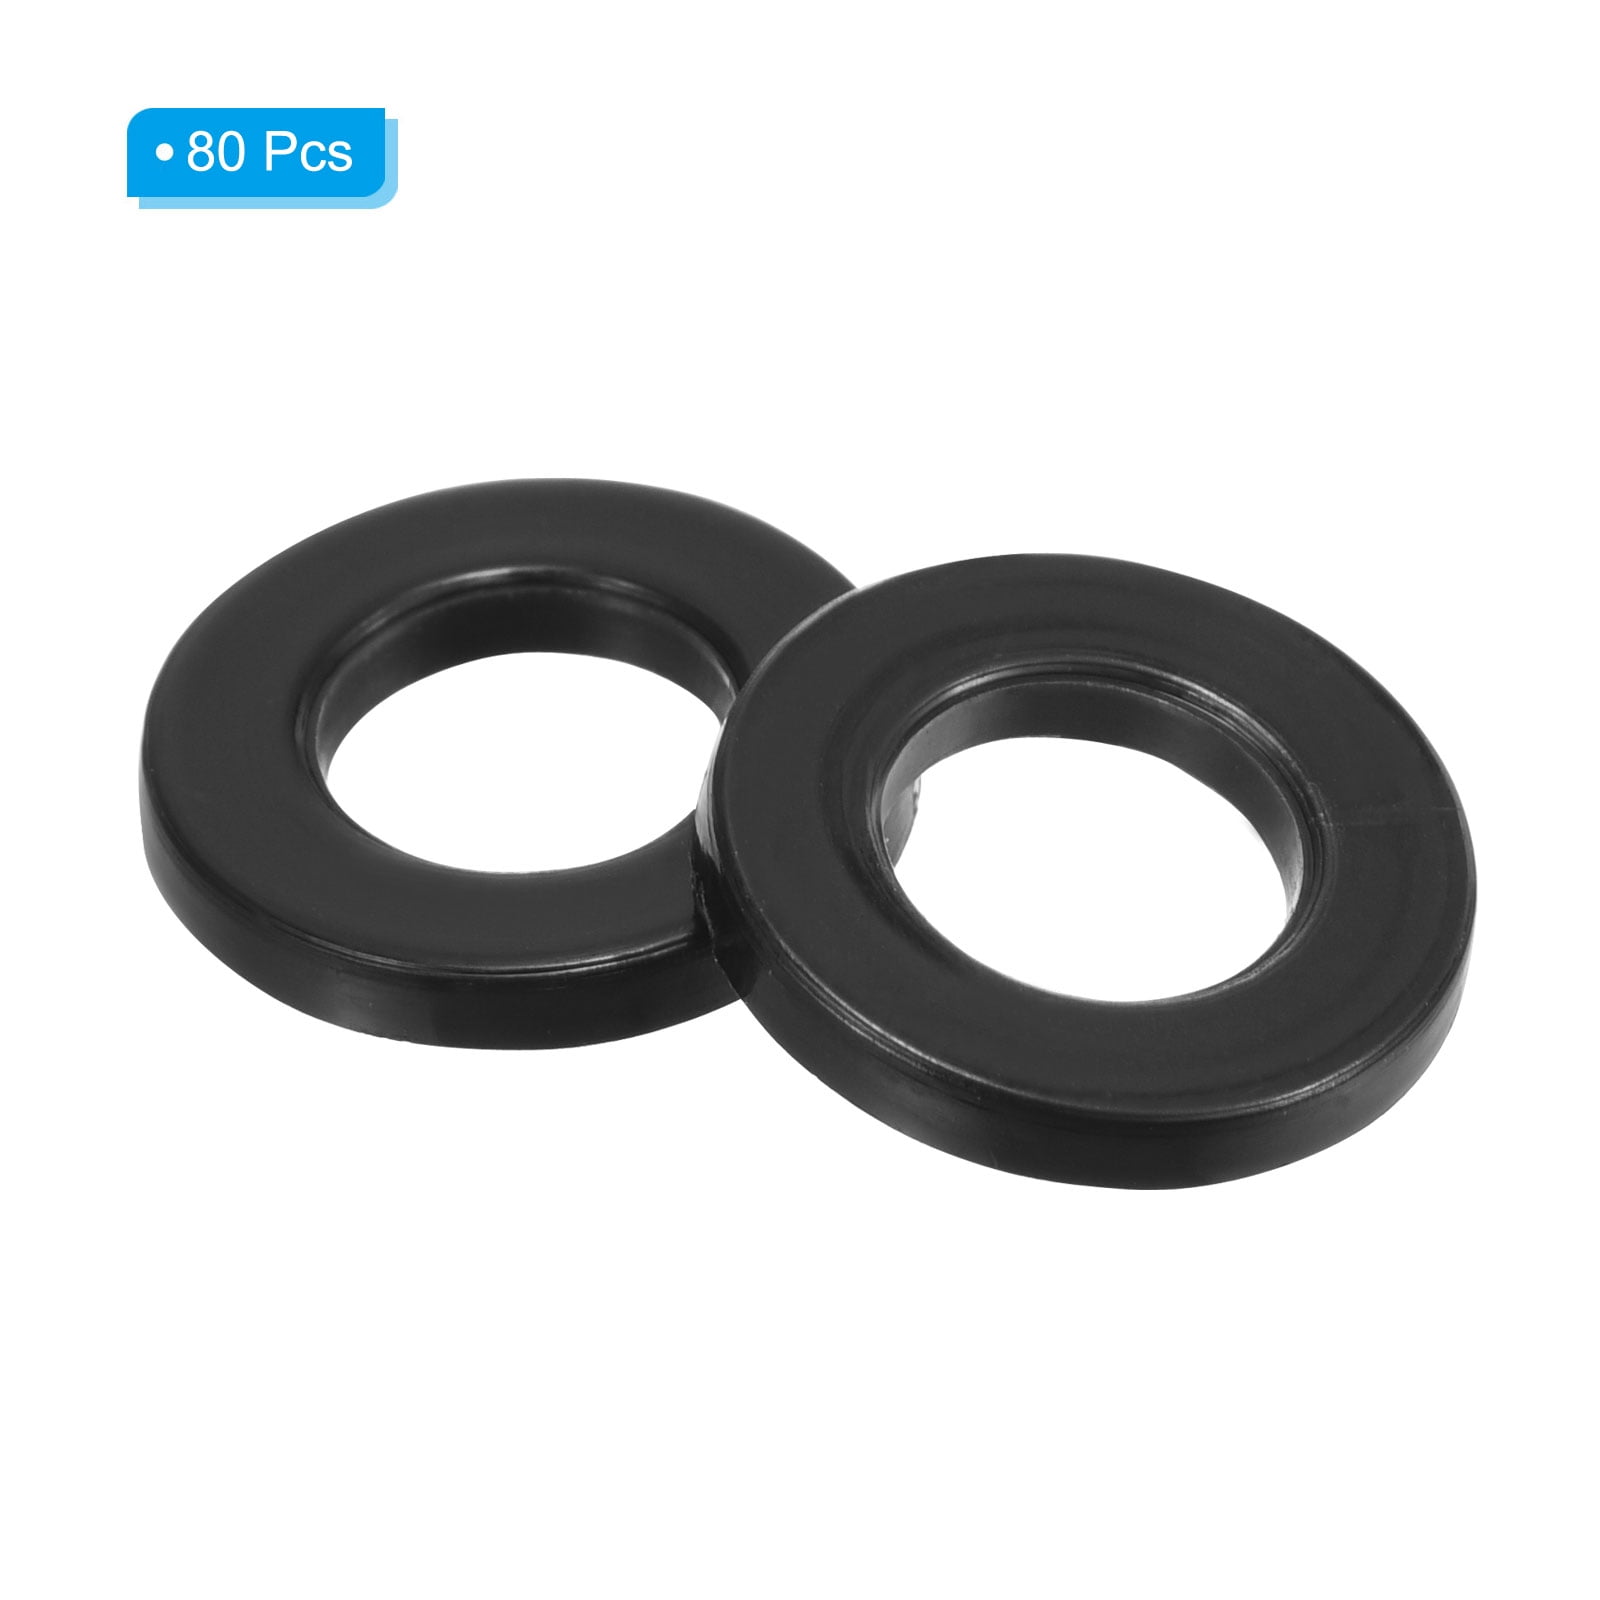 M6 Rubber Flat Washer, 60 Pack 5mm ID 13mm OD Sealing Spacer Gasket Ring  for Faucet Pipe Fastener Bolt, Black 